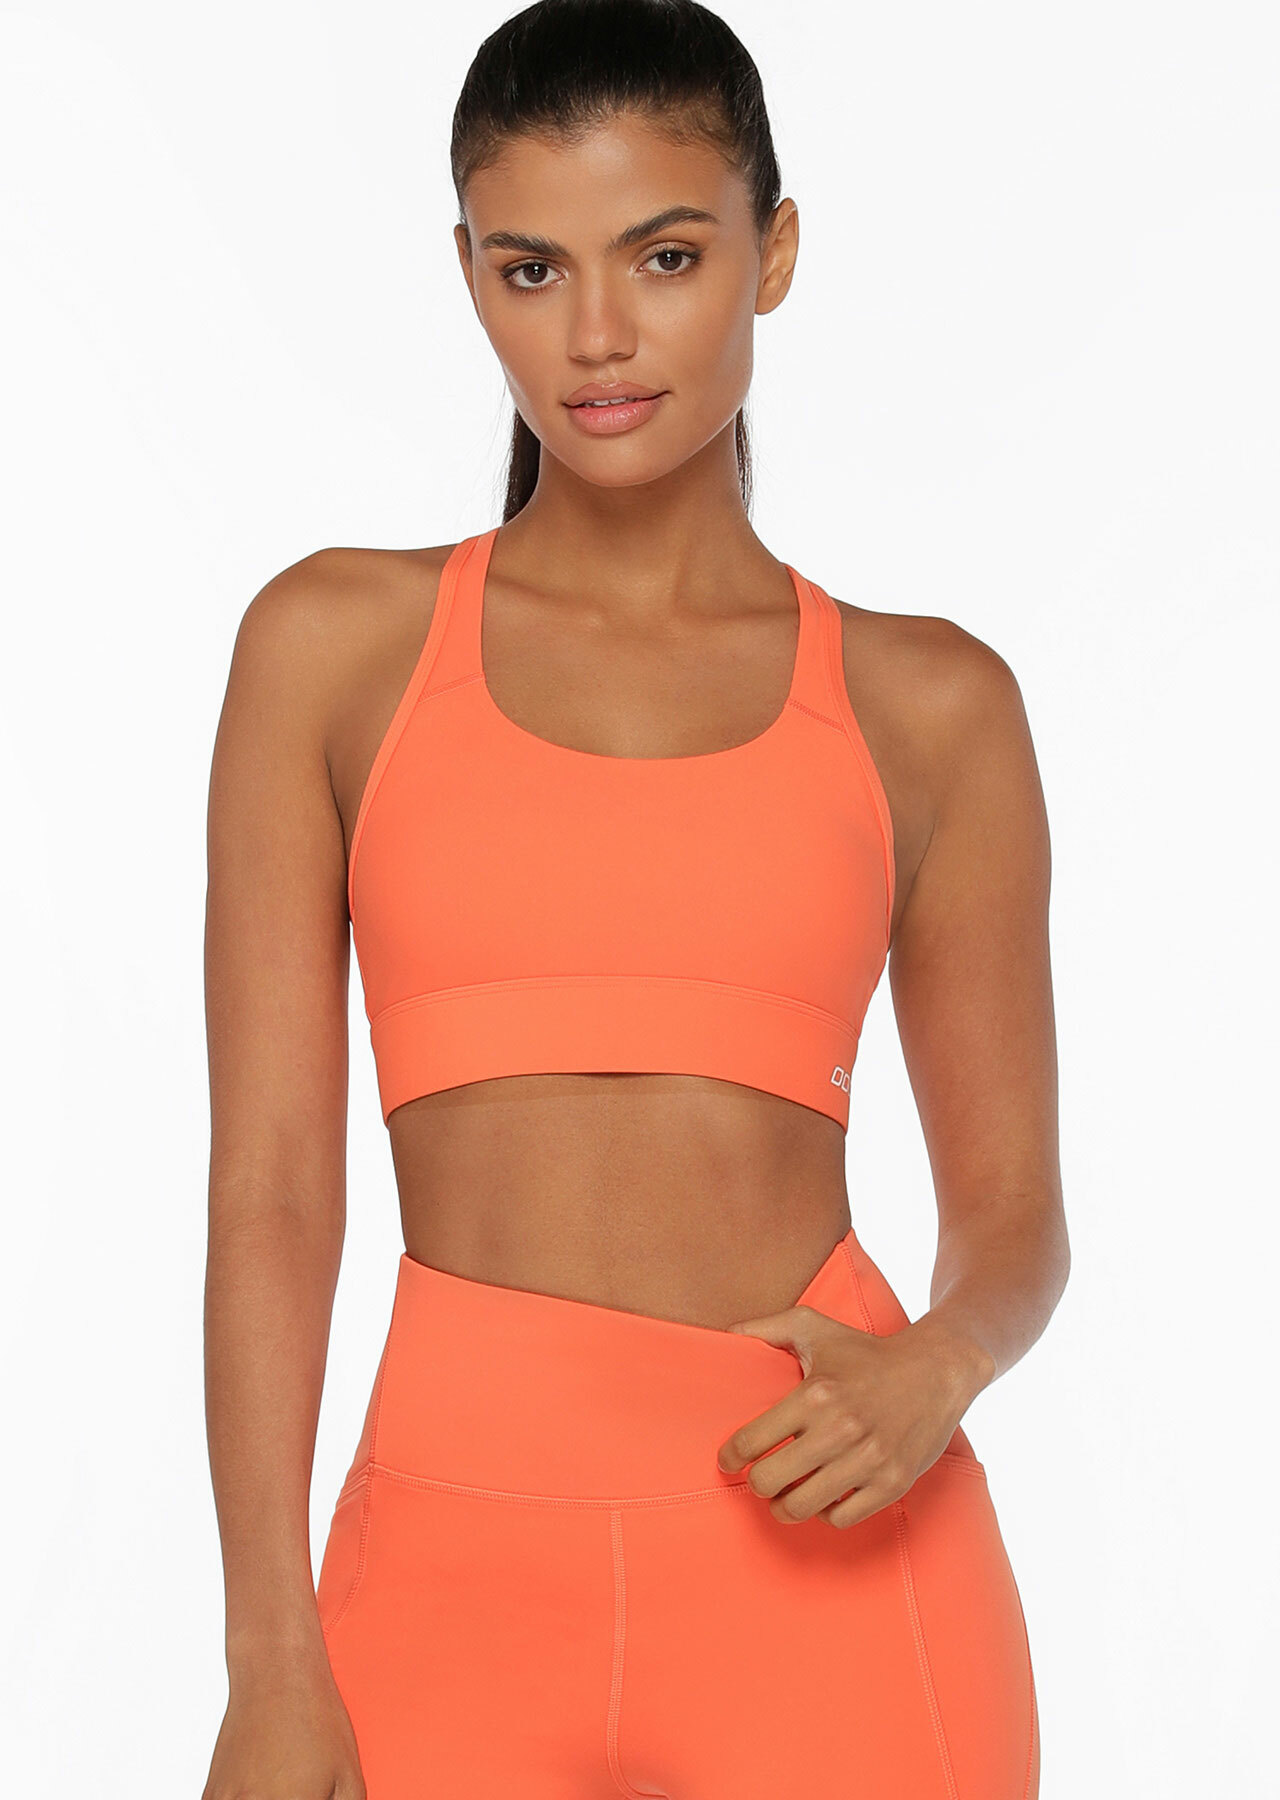 TCT Minimizer Sports Bra with 4 way support in orange – The Comfort Theory